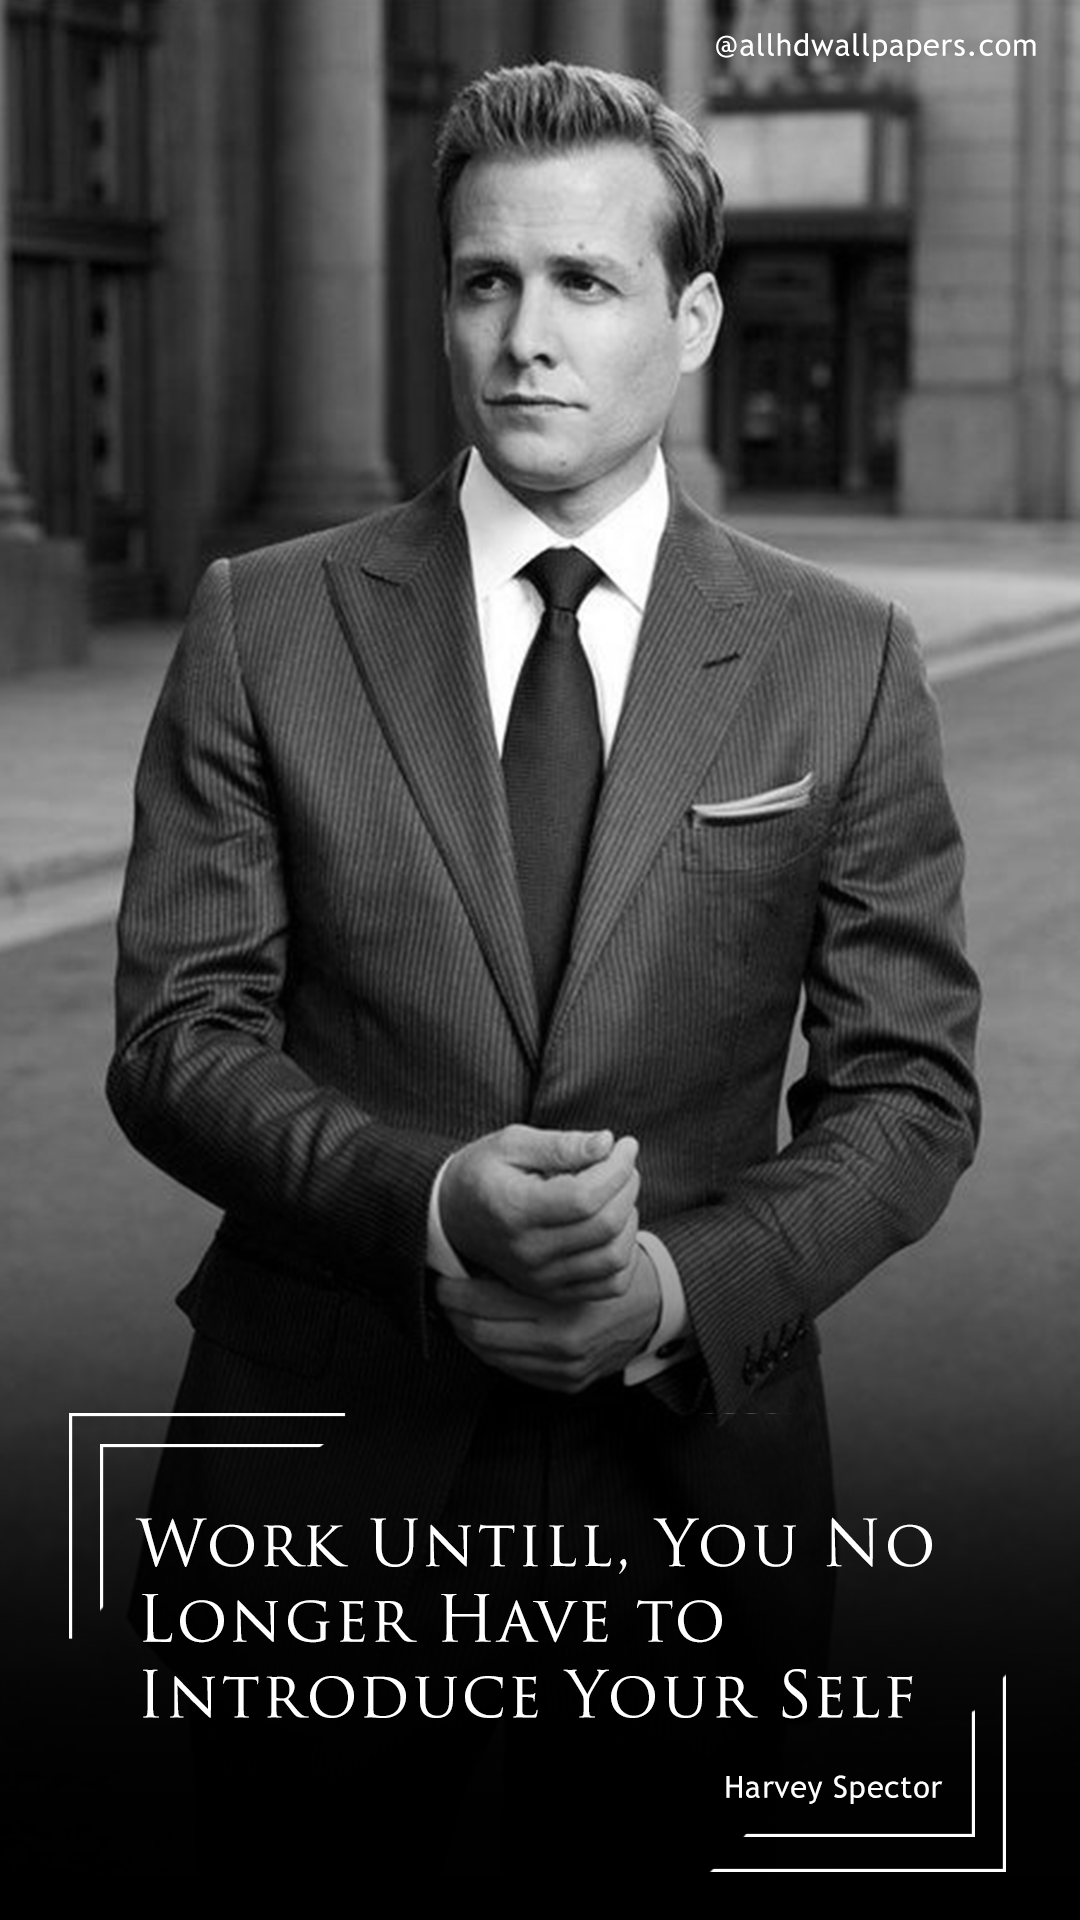 Harvey Specter Quotes will Inspire you to Work Hard